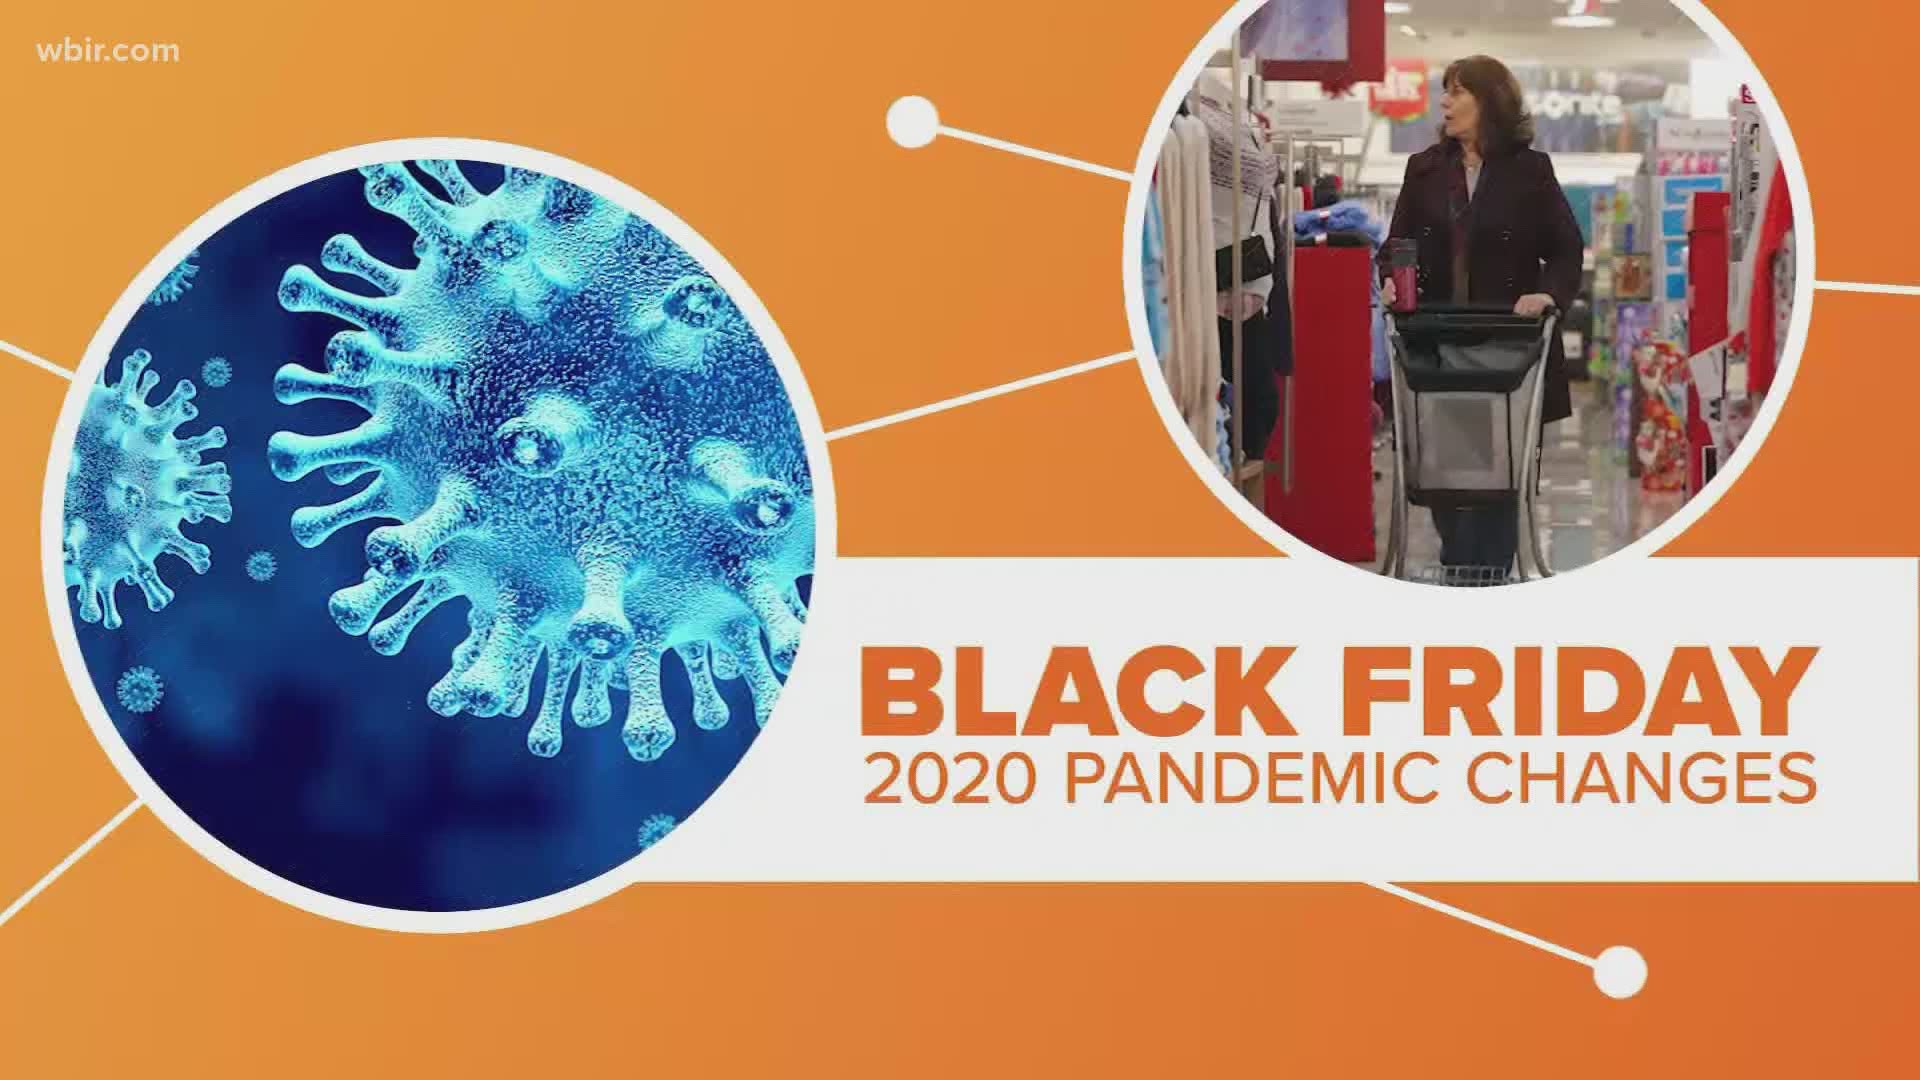 We may be tired of hearing about the "new normal" but coronavirus continues to upend time honored traditions and that includes Black Friday.